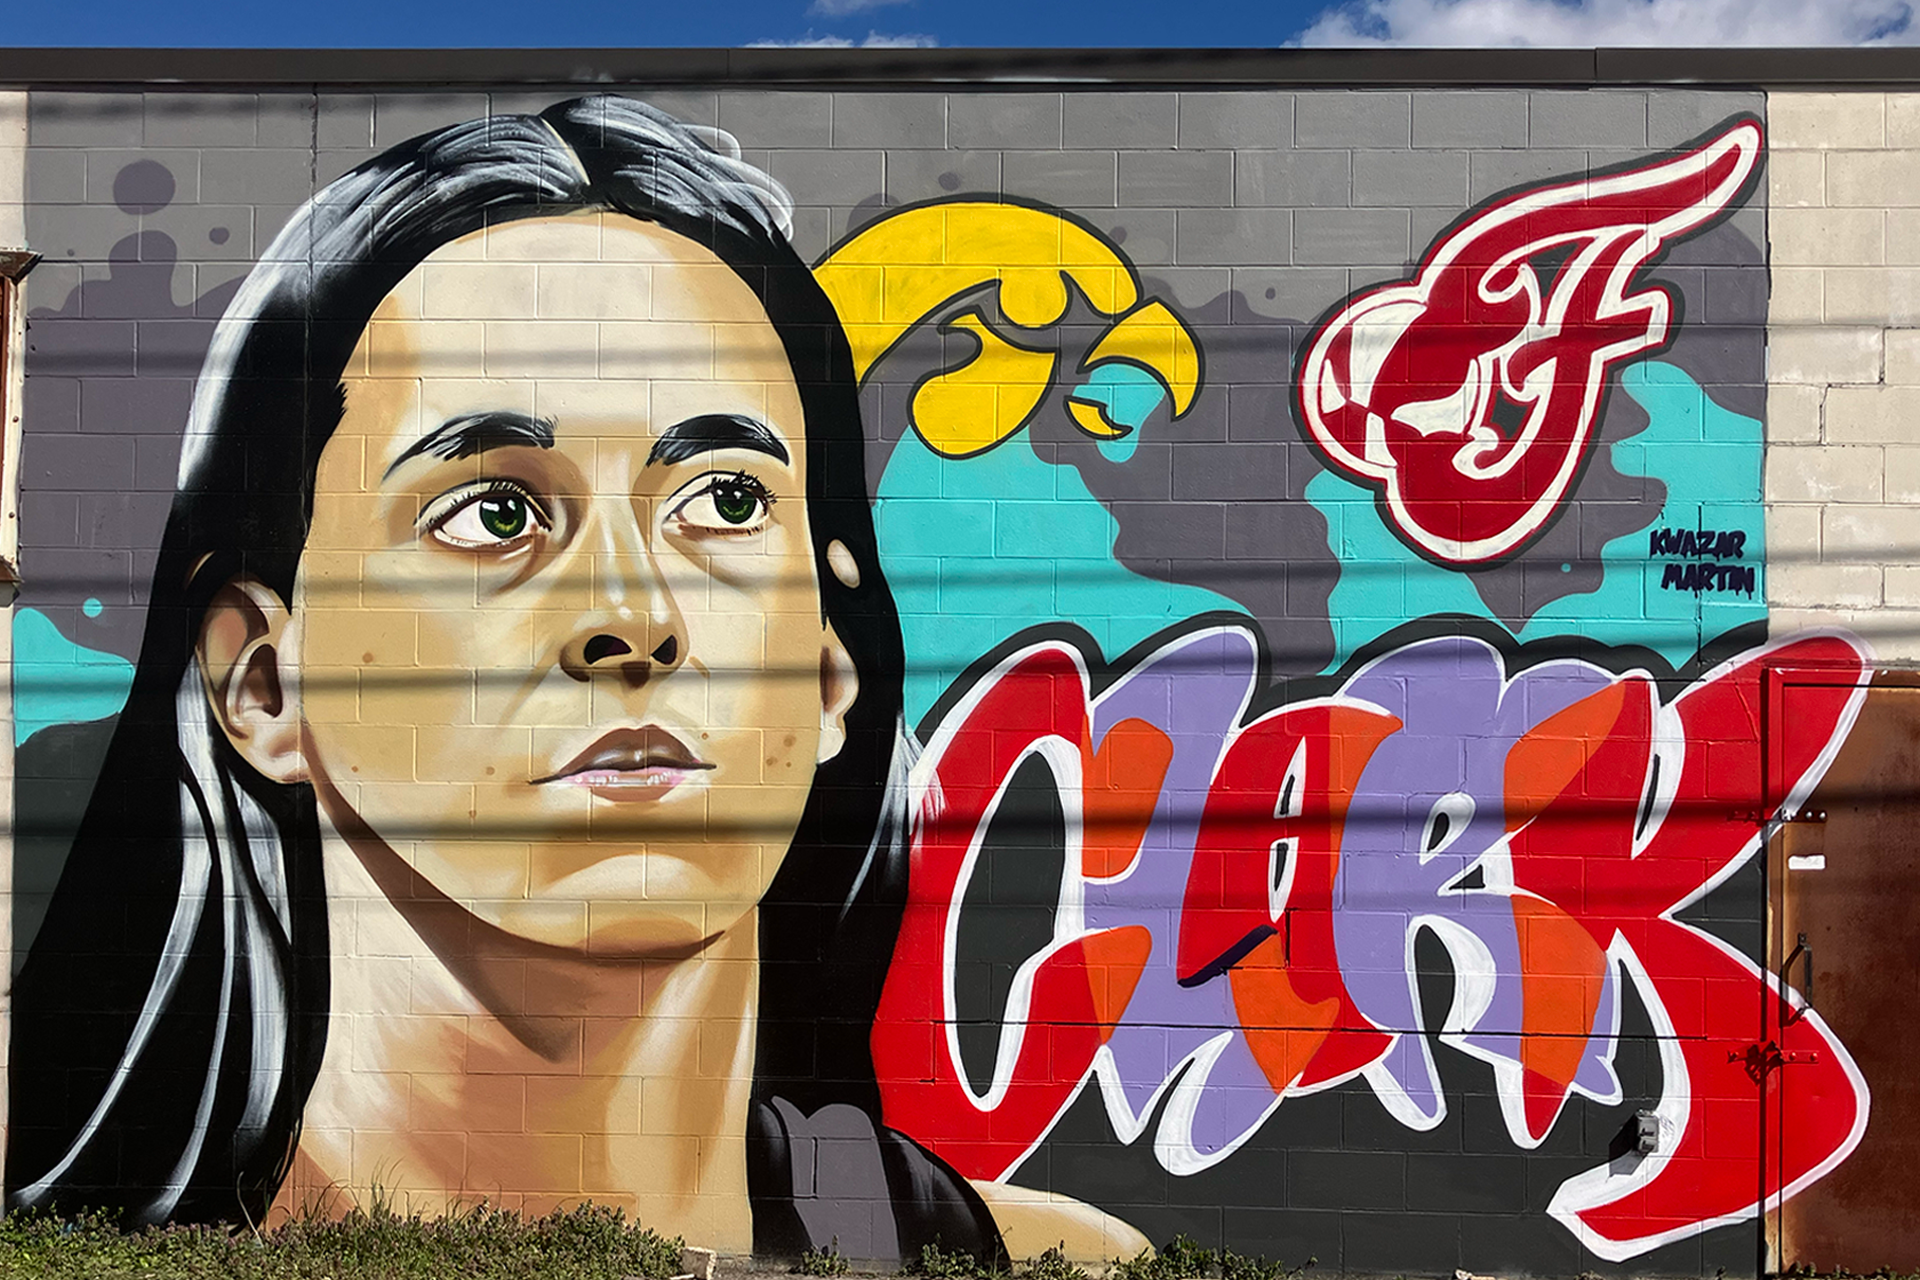 LOCAL: Check Out This Awesome Mural Of College Hoops Star Caitlin Clark!